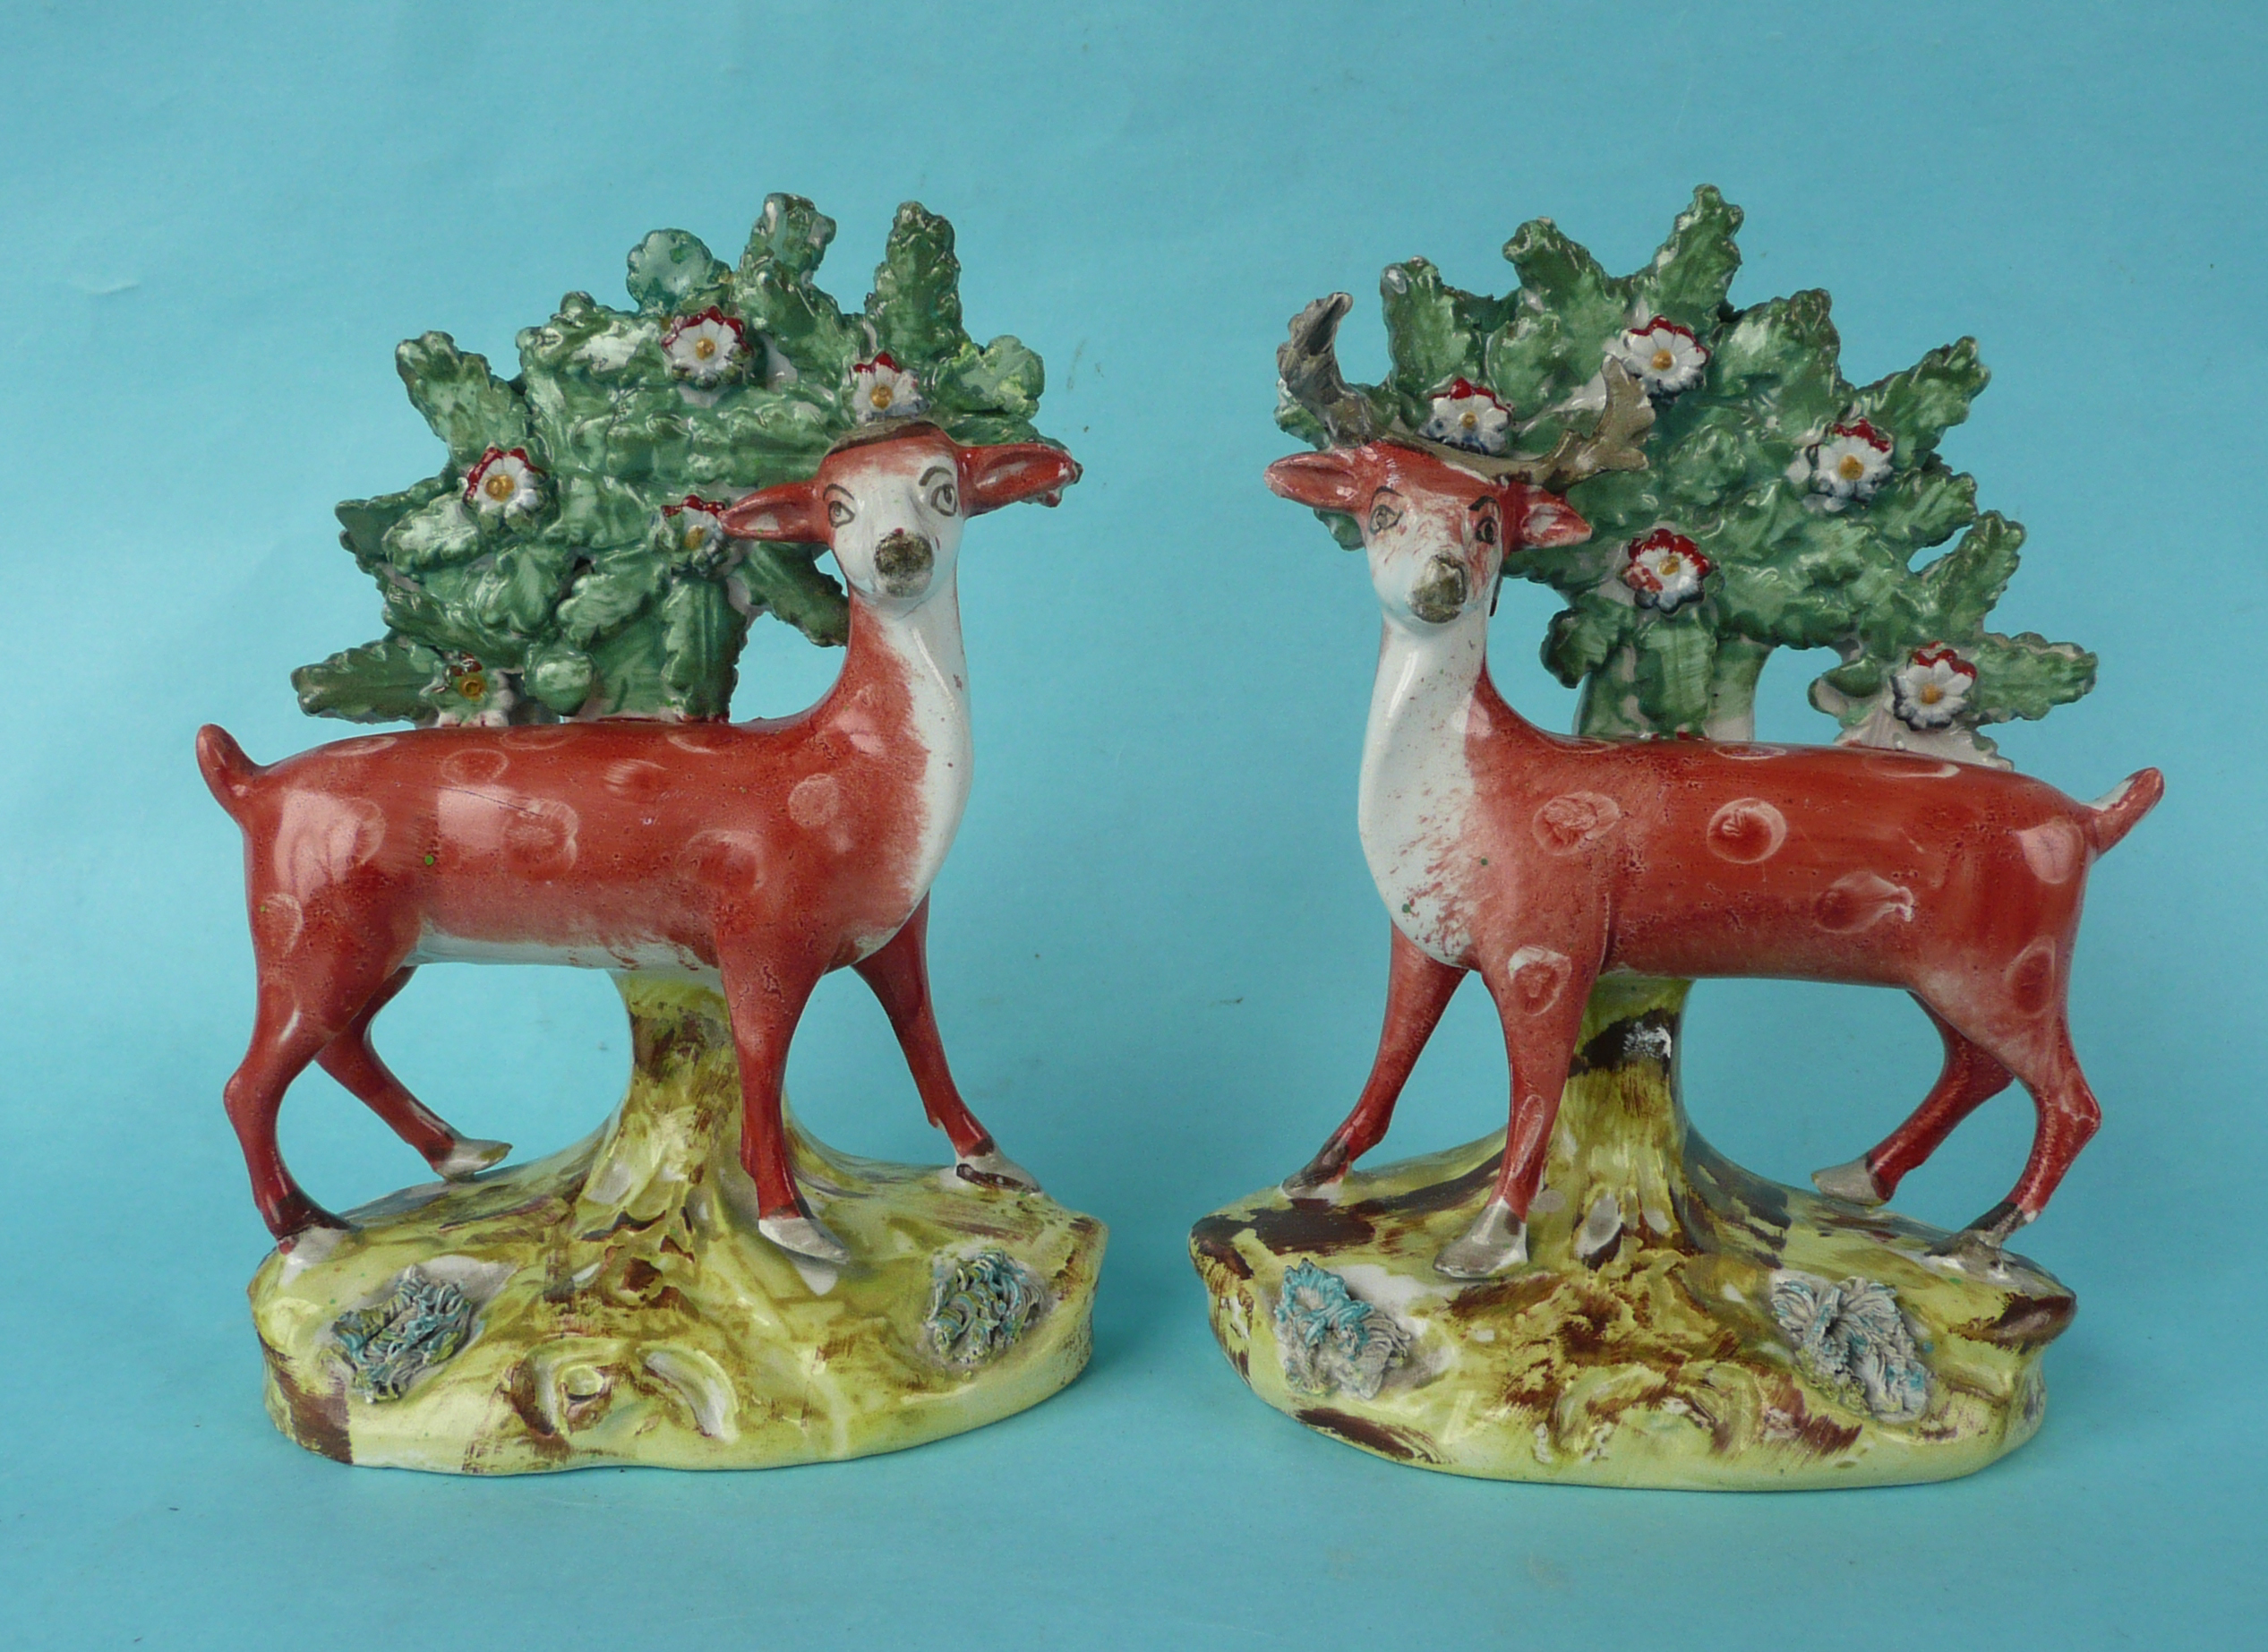 A pair of Staffordshire figures of deer depicted standing before a bocage on well painted bases